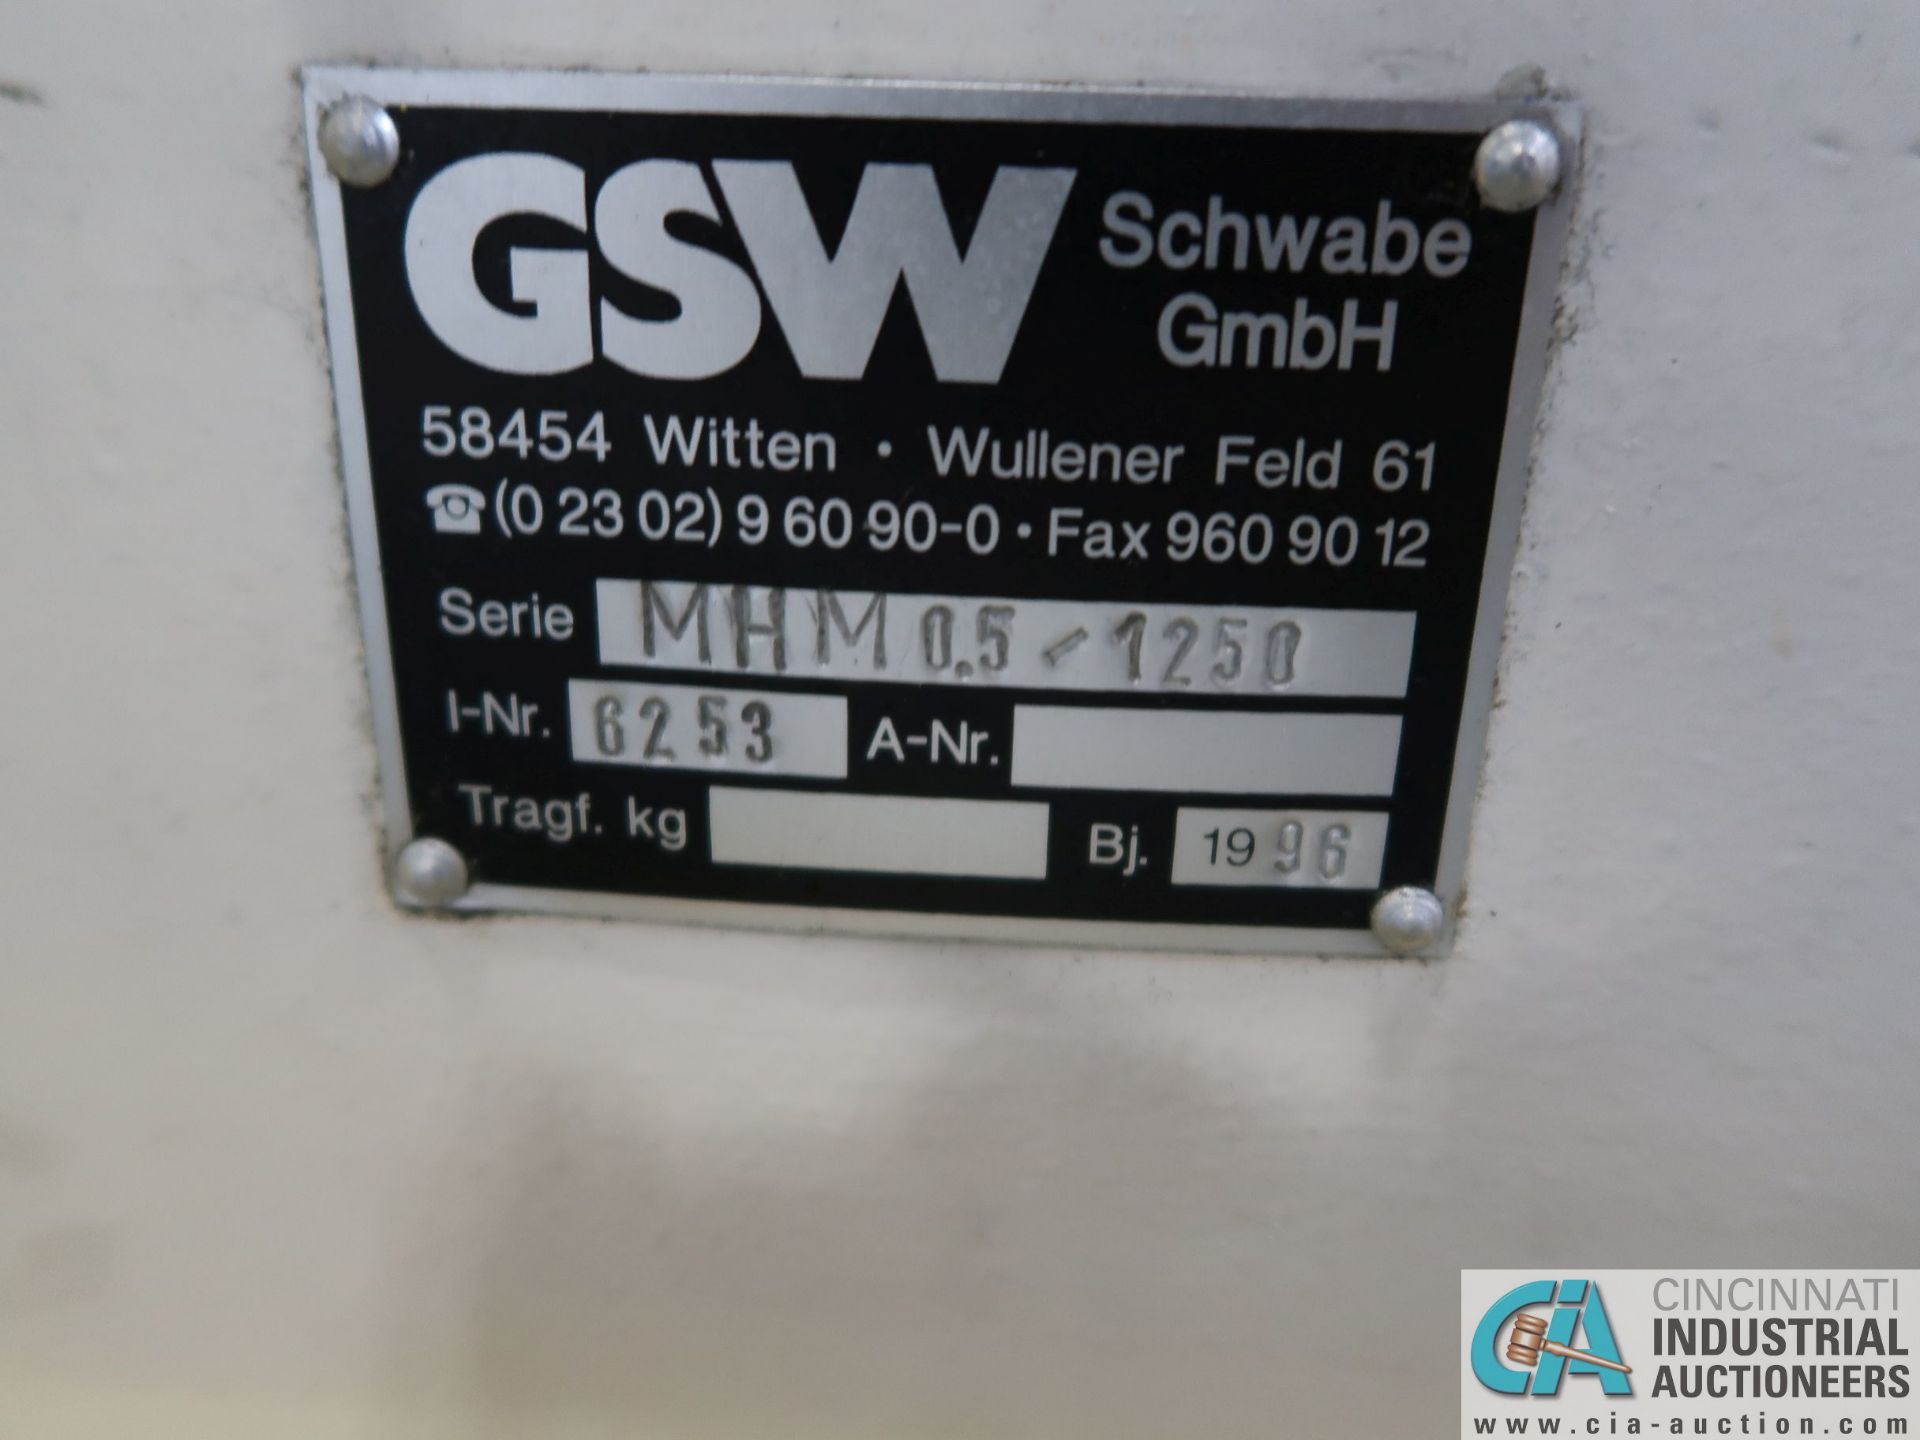 GSW MODEL MHM 0.5/1250 SO EXPANDING MANDREL UNCOILER; S/N 6253 (NEW 1996) *$50.00 RIGGING FEE DUE - Image 2 of 2